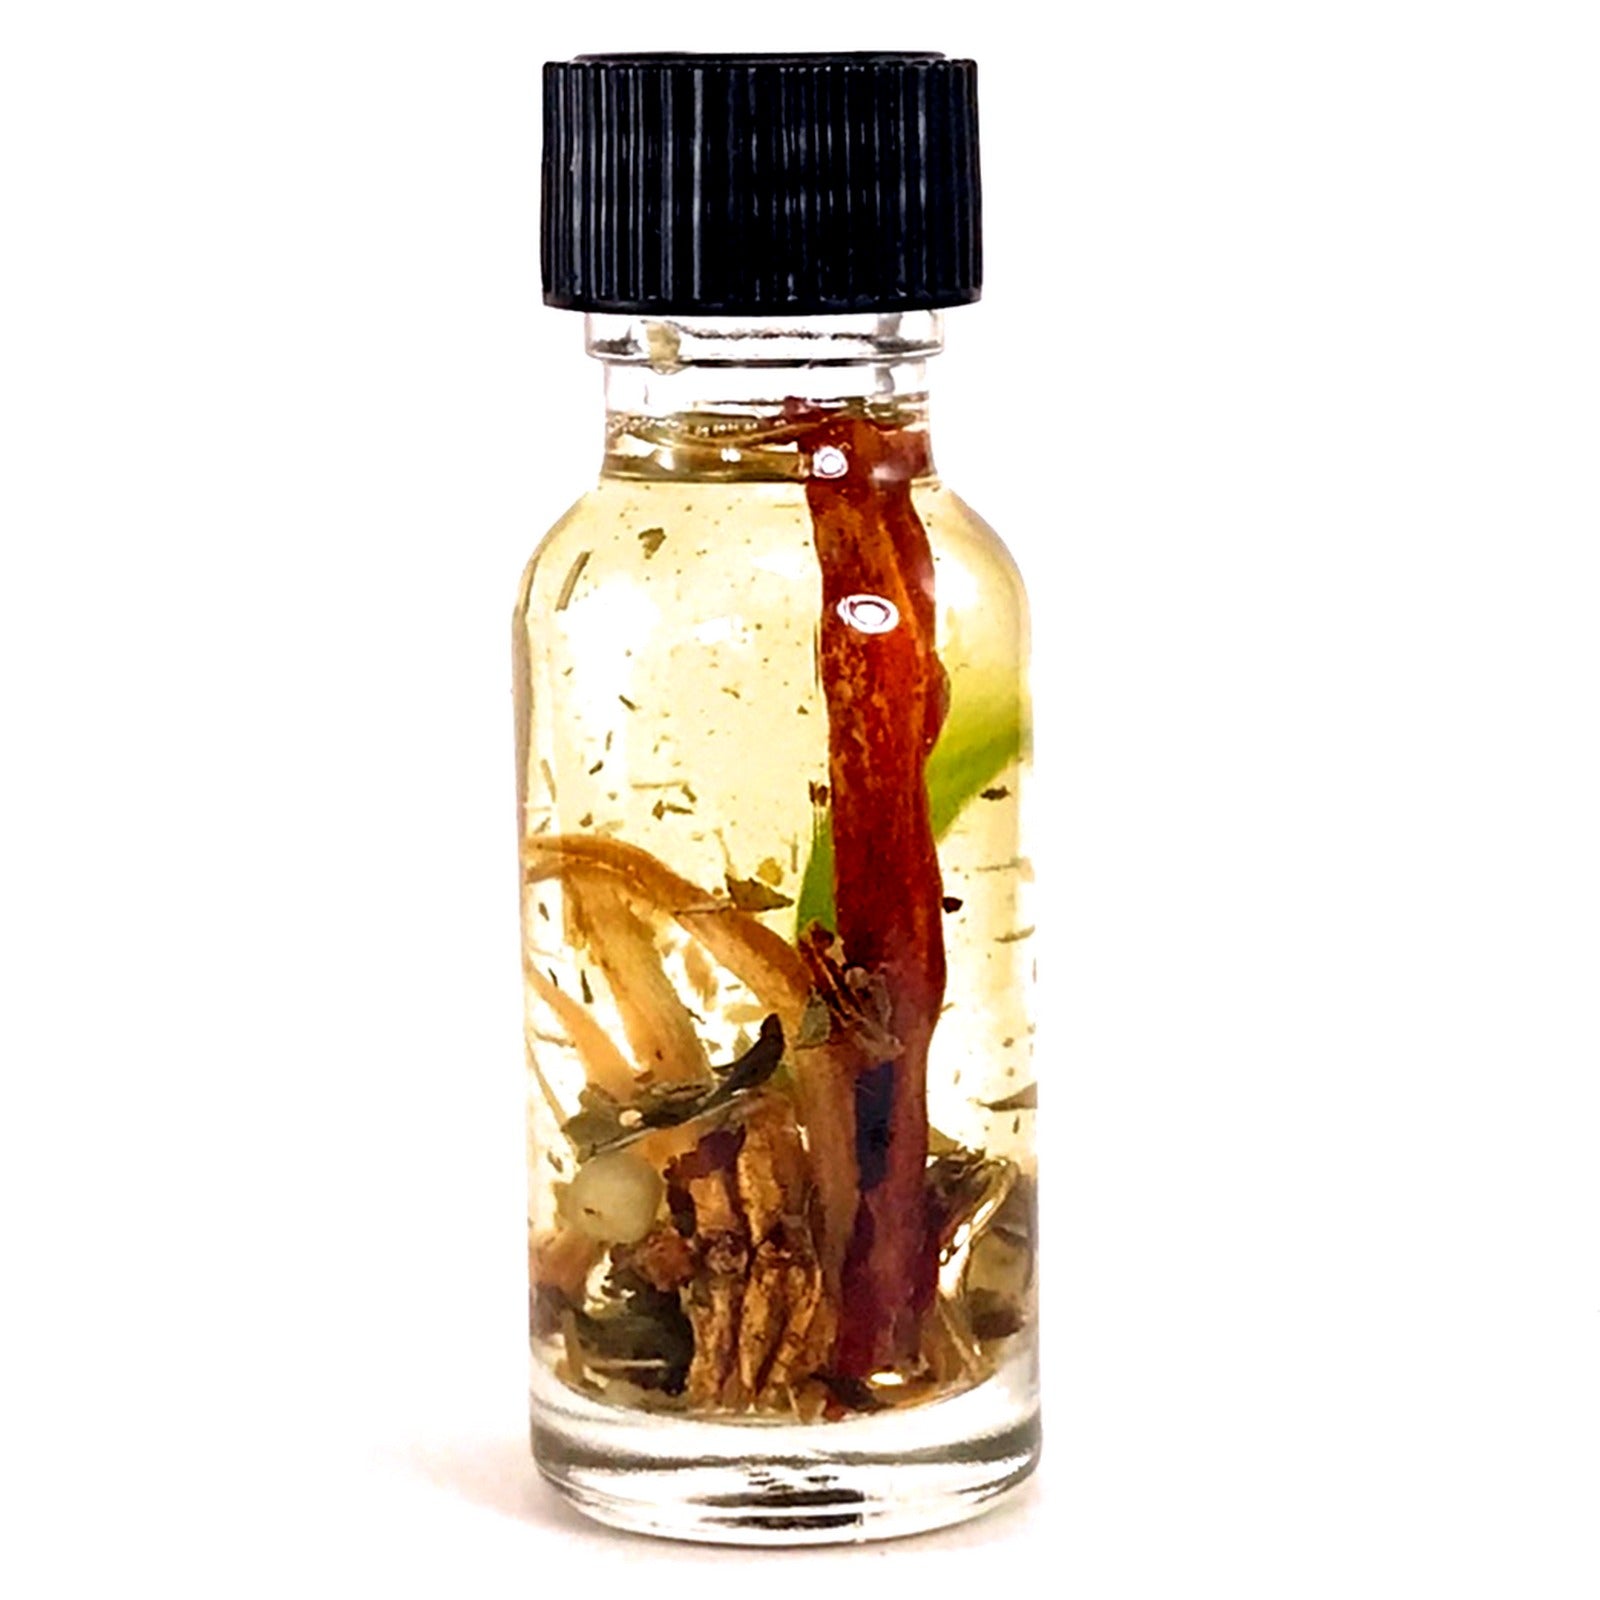 Twichery Uncrossing Oil is the perfect magickal standby for all your uncrossing needs. Works great as a preventative as well! Hoodoo Voodoo Wicca Pagan